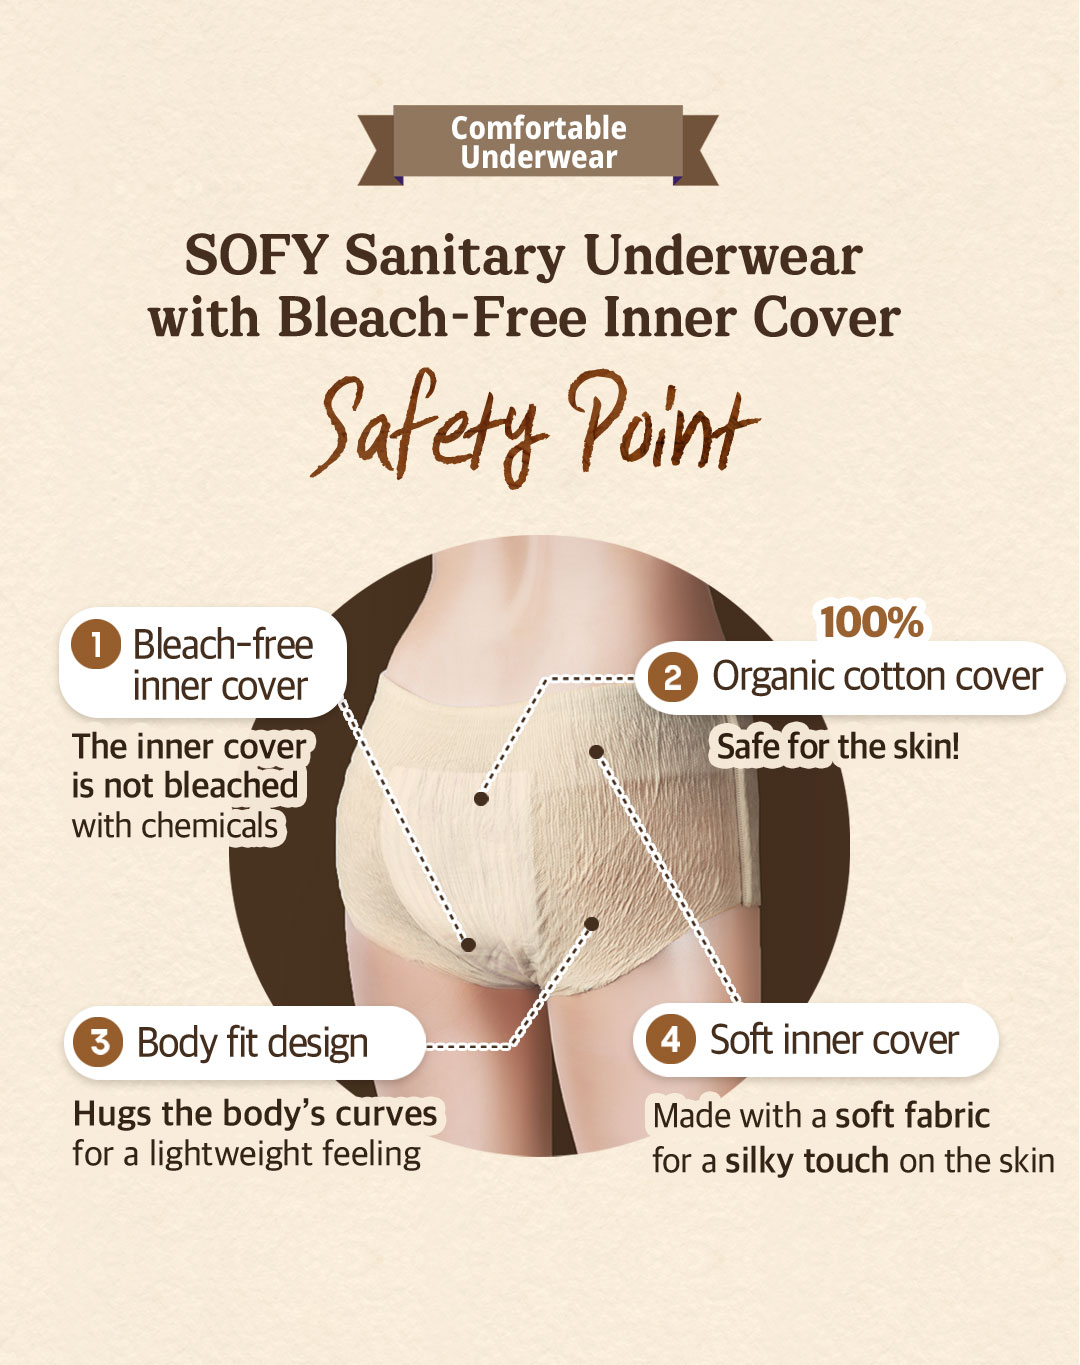 Soft body fit underwear For Comfort 